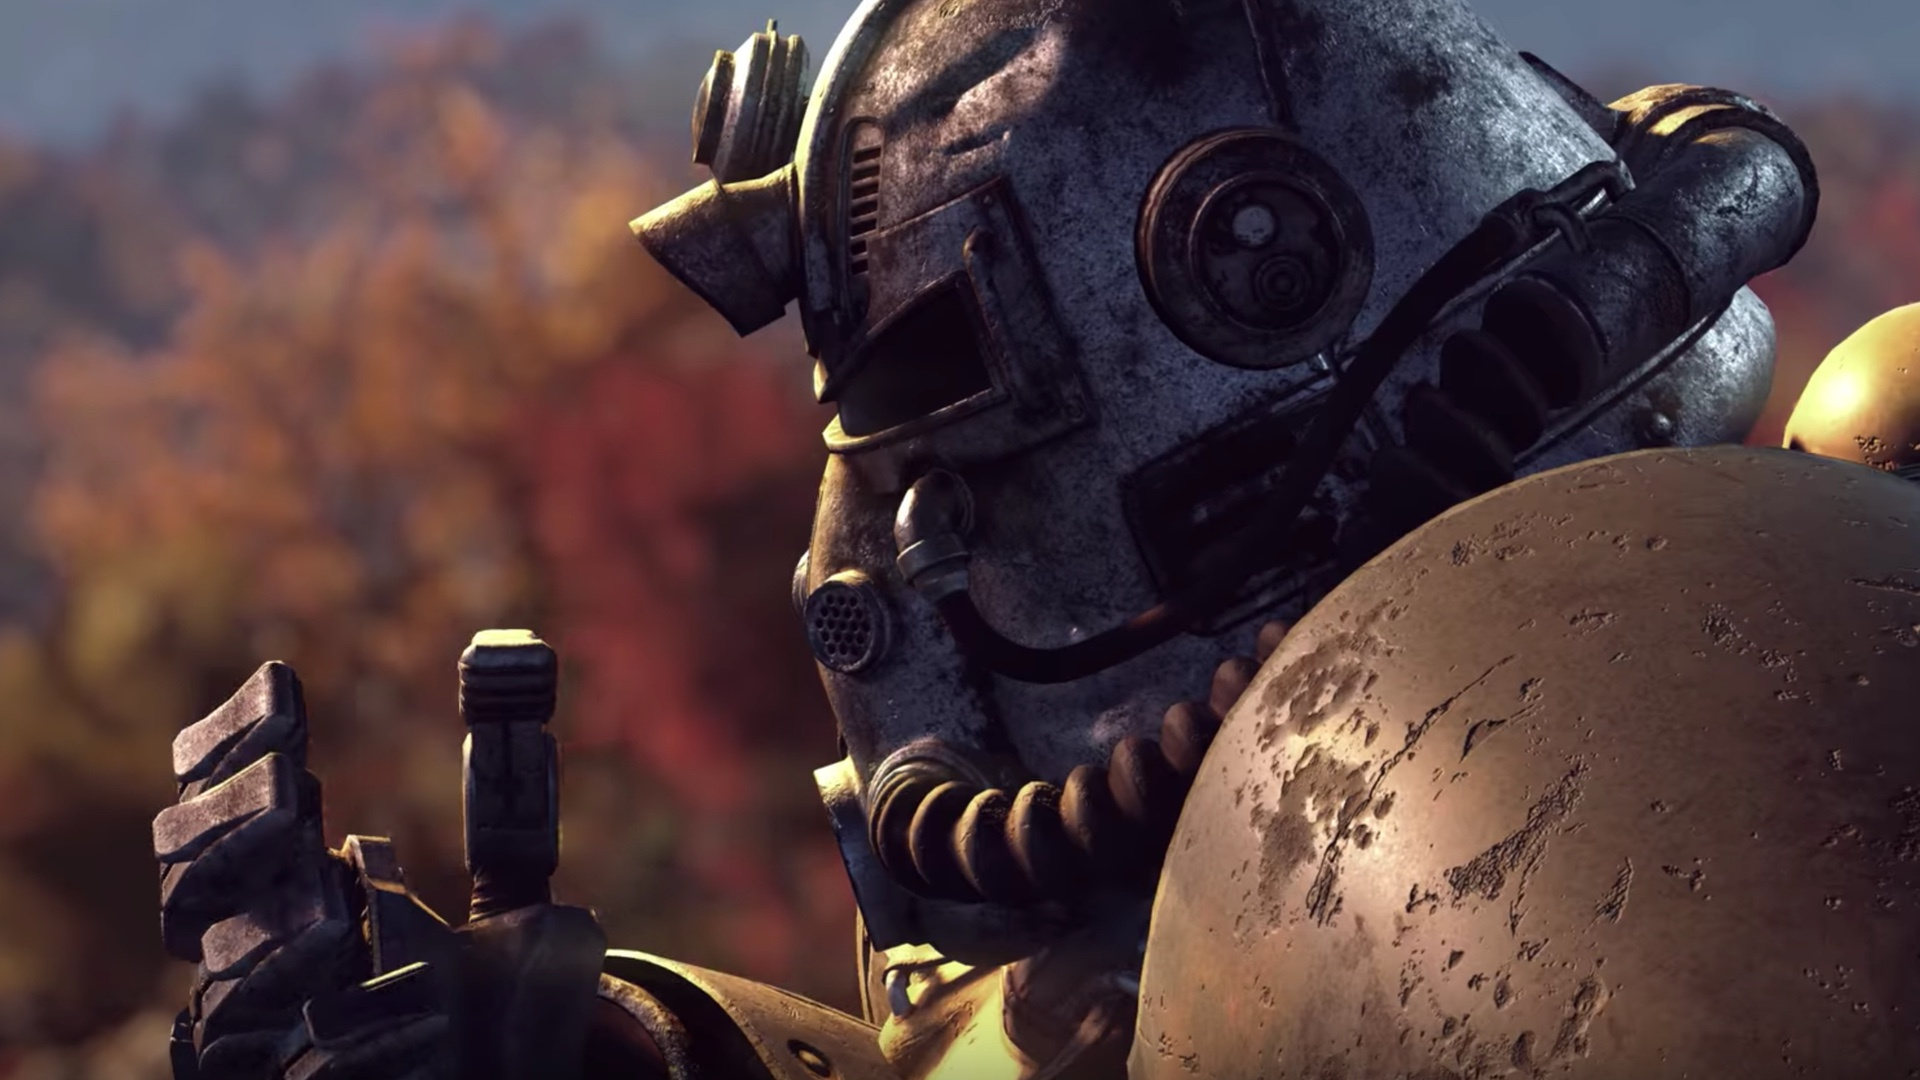 fallout 76 free to play ps4